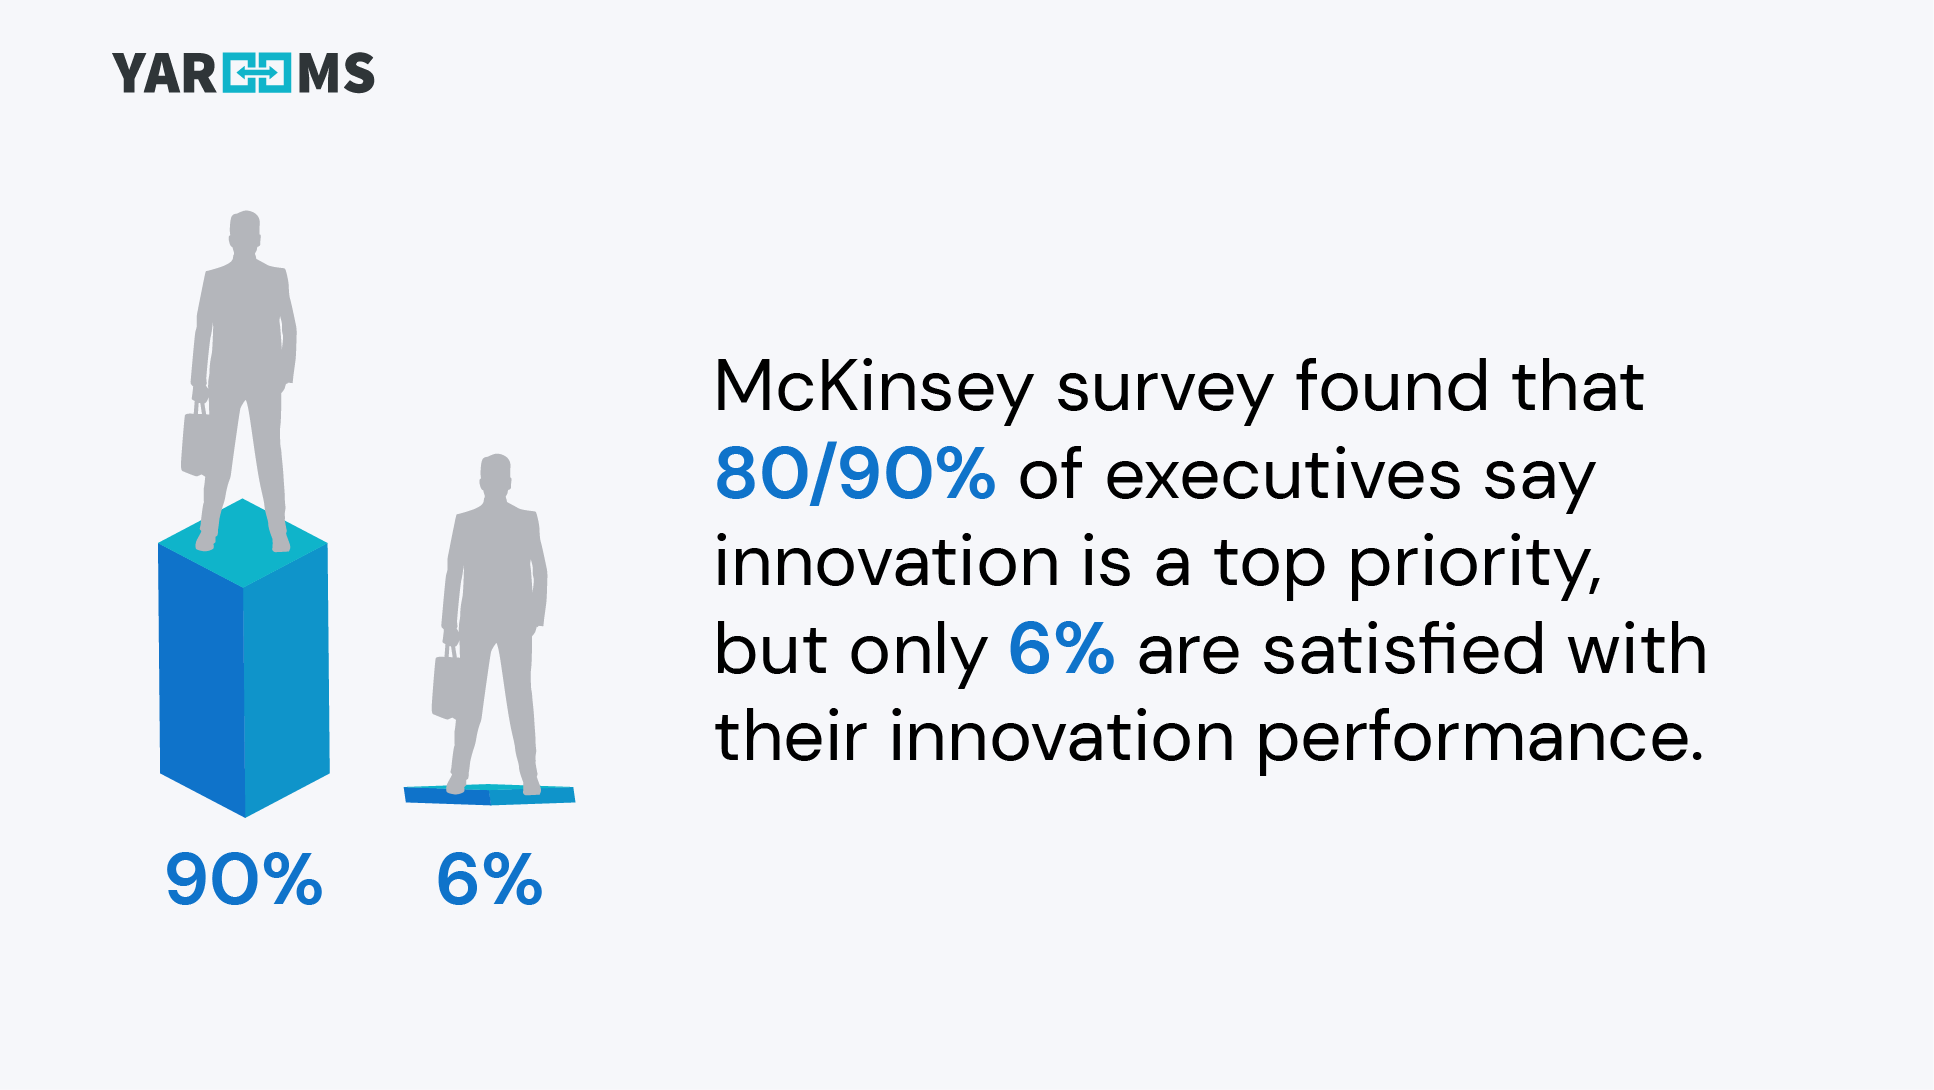 infographic about McKinsey survey found that 80 or 90 percent of executives say innovation is a top priority, but only 6 percent are satisfied with their innovation performance